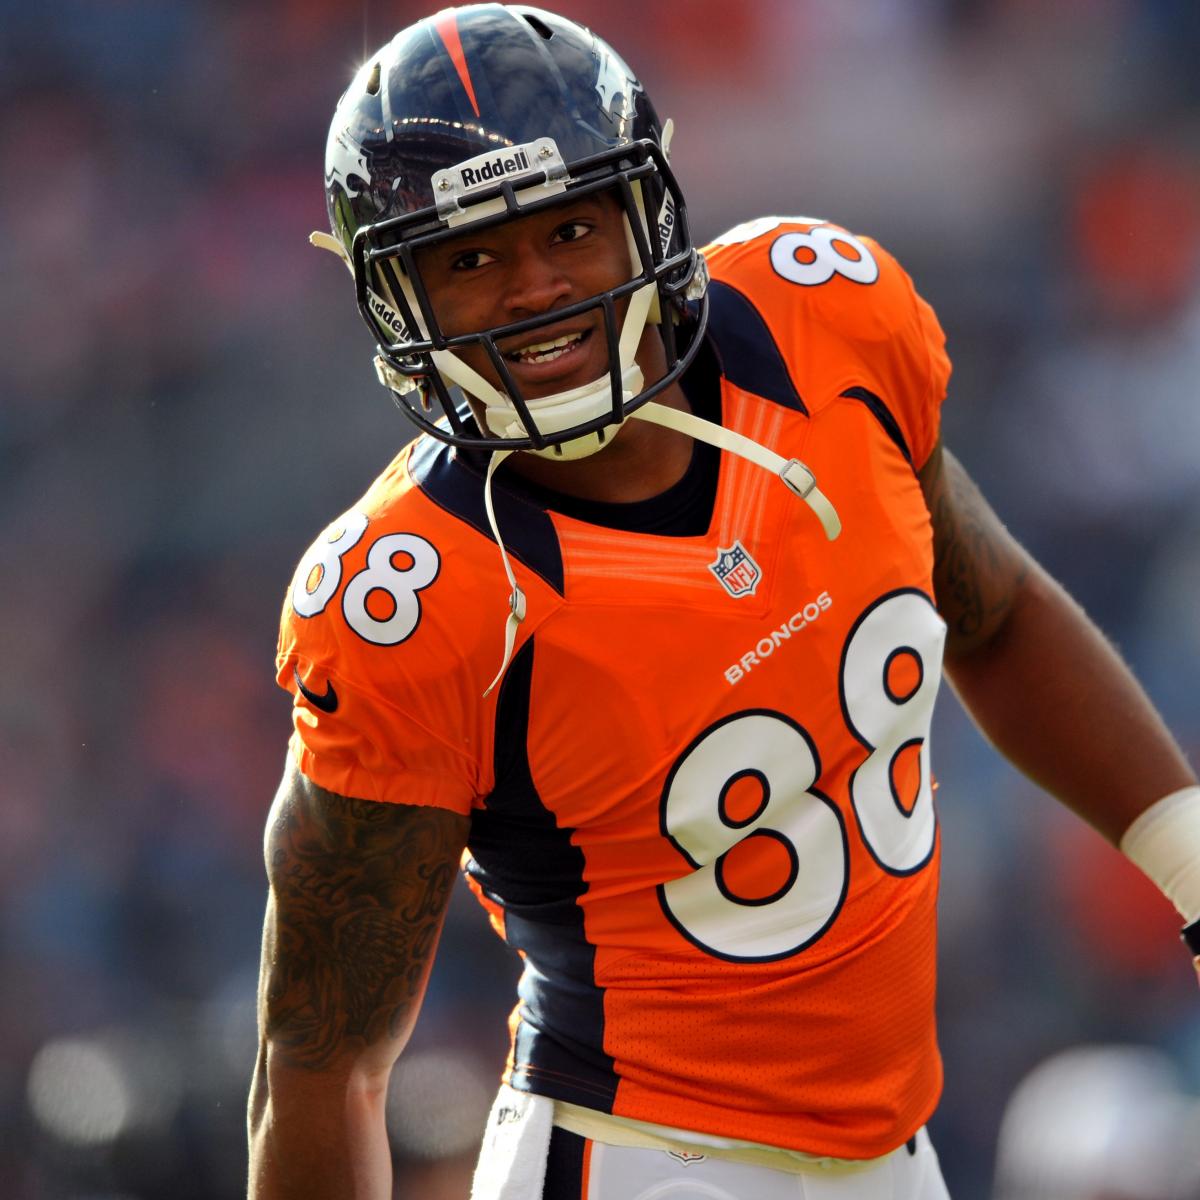 Demaryius Thomas' Updated 2013 Fantasy Outlook and Trade Value After